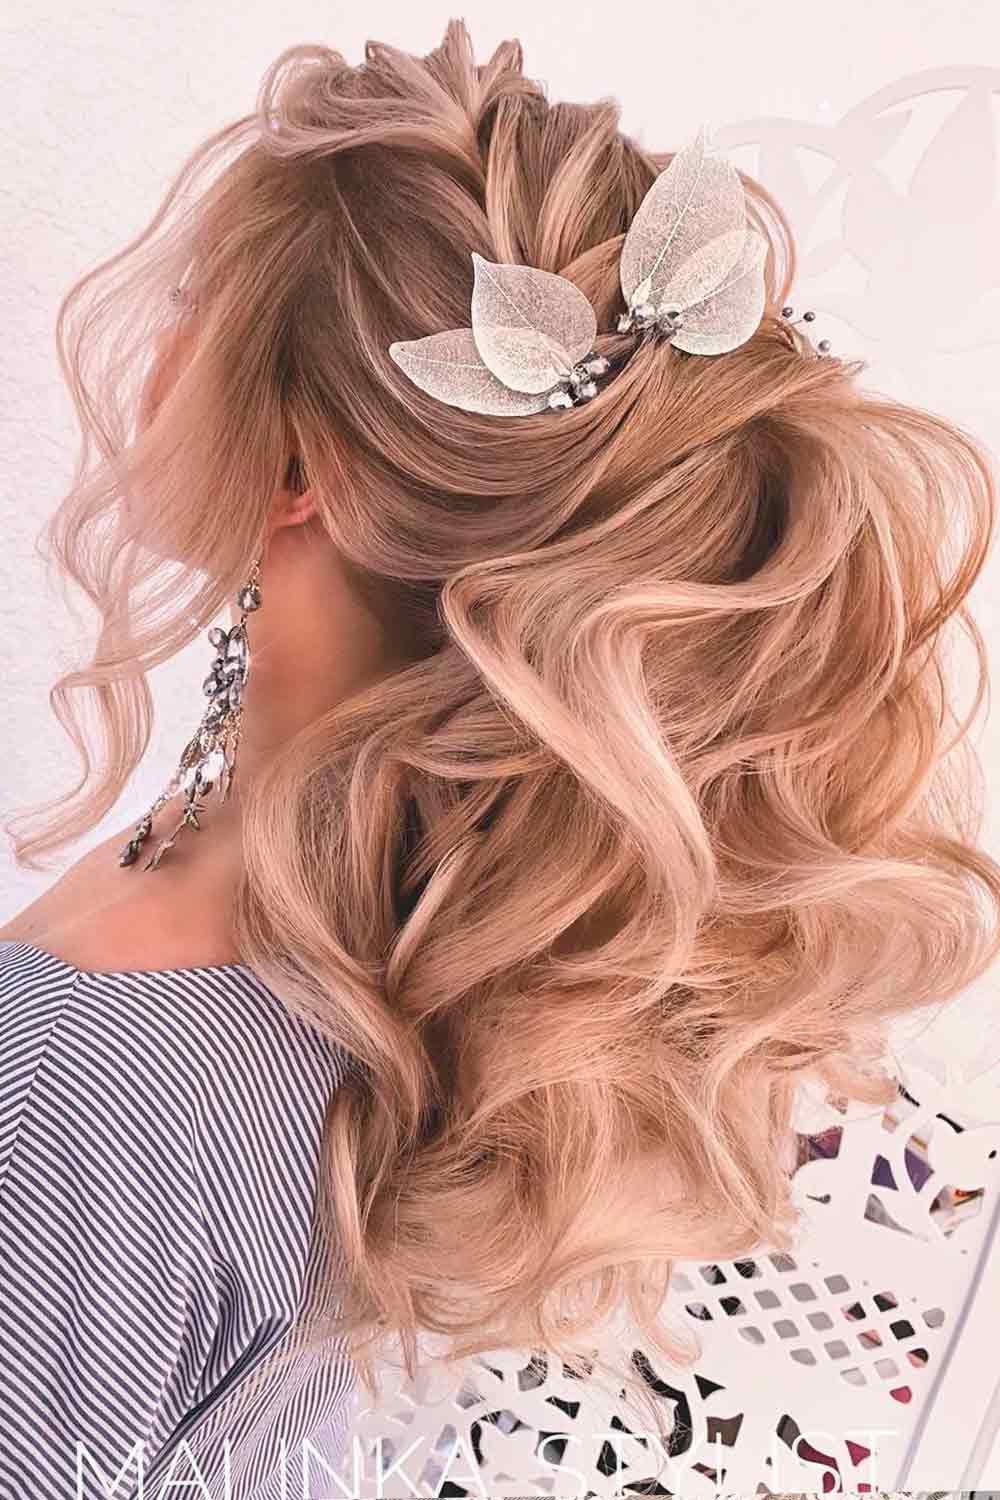 16++ Prom hairstyles for long hair ideas in 2022 